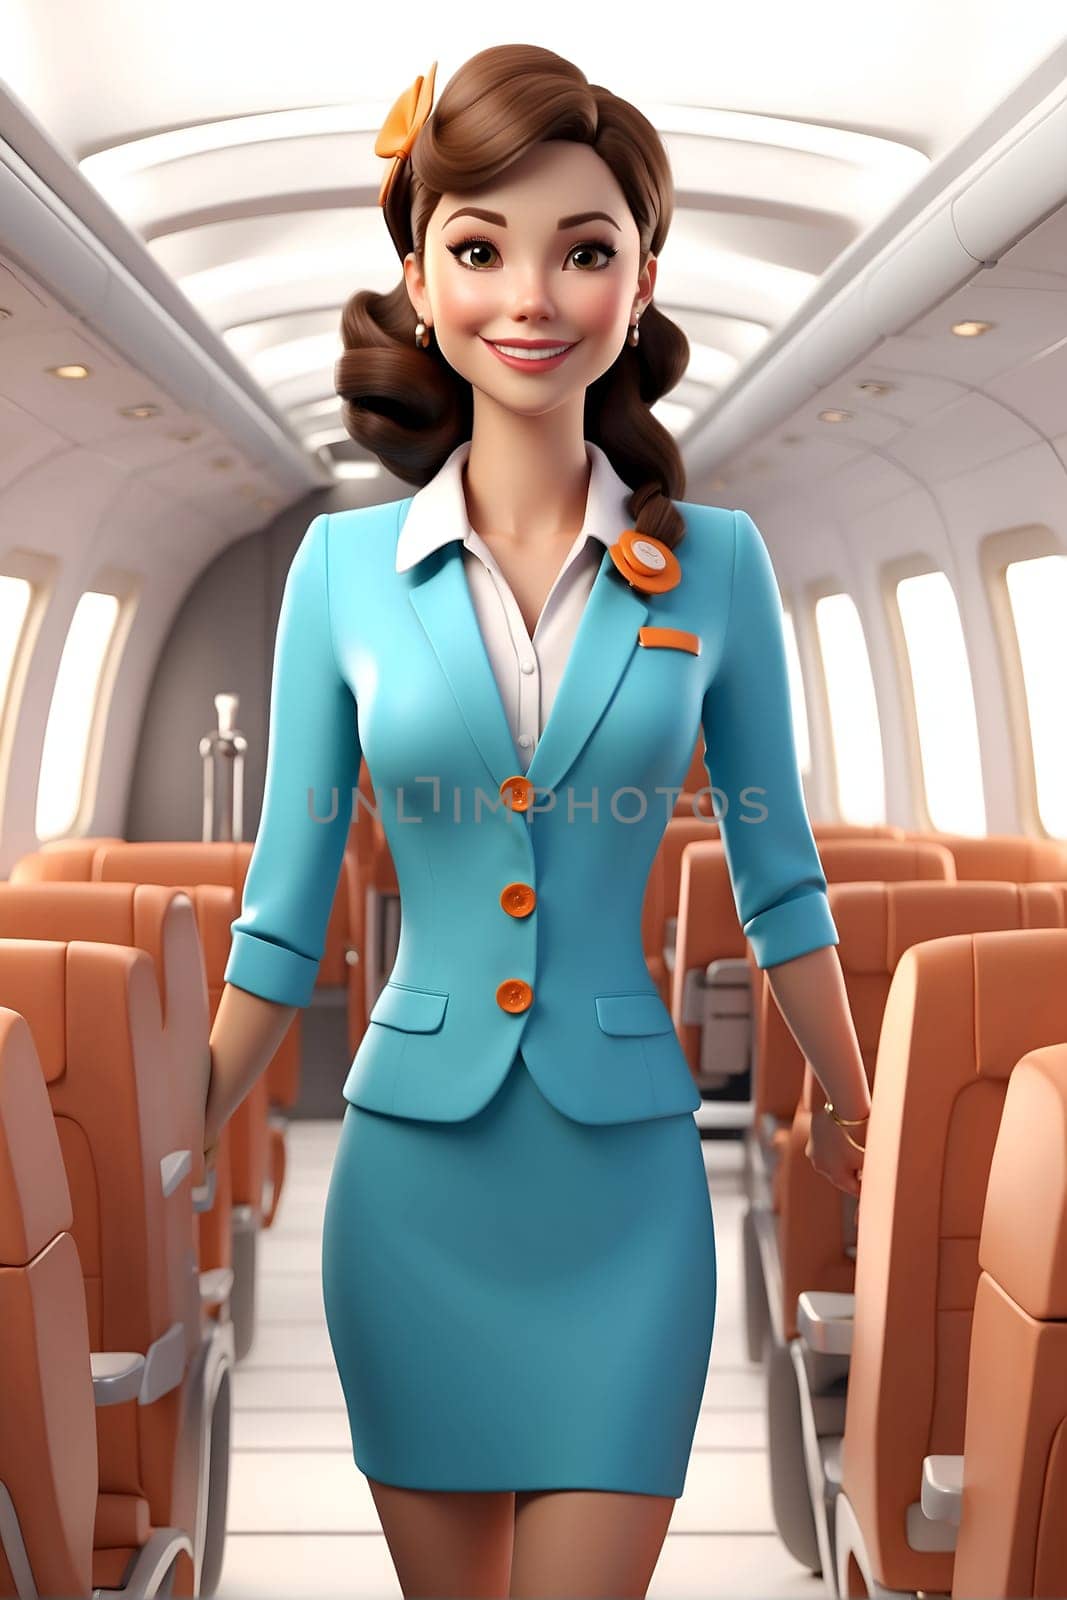 A woman looks stylish in her blue dress and jacket as she travels on an airplane.